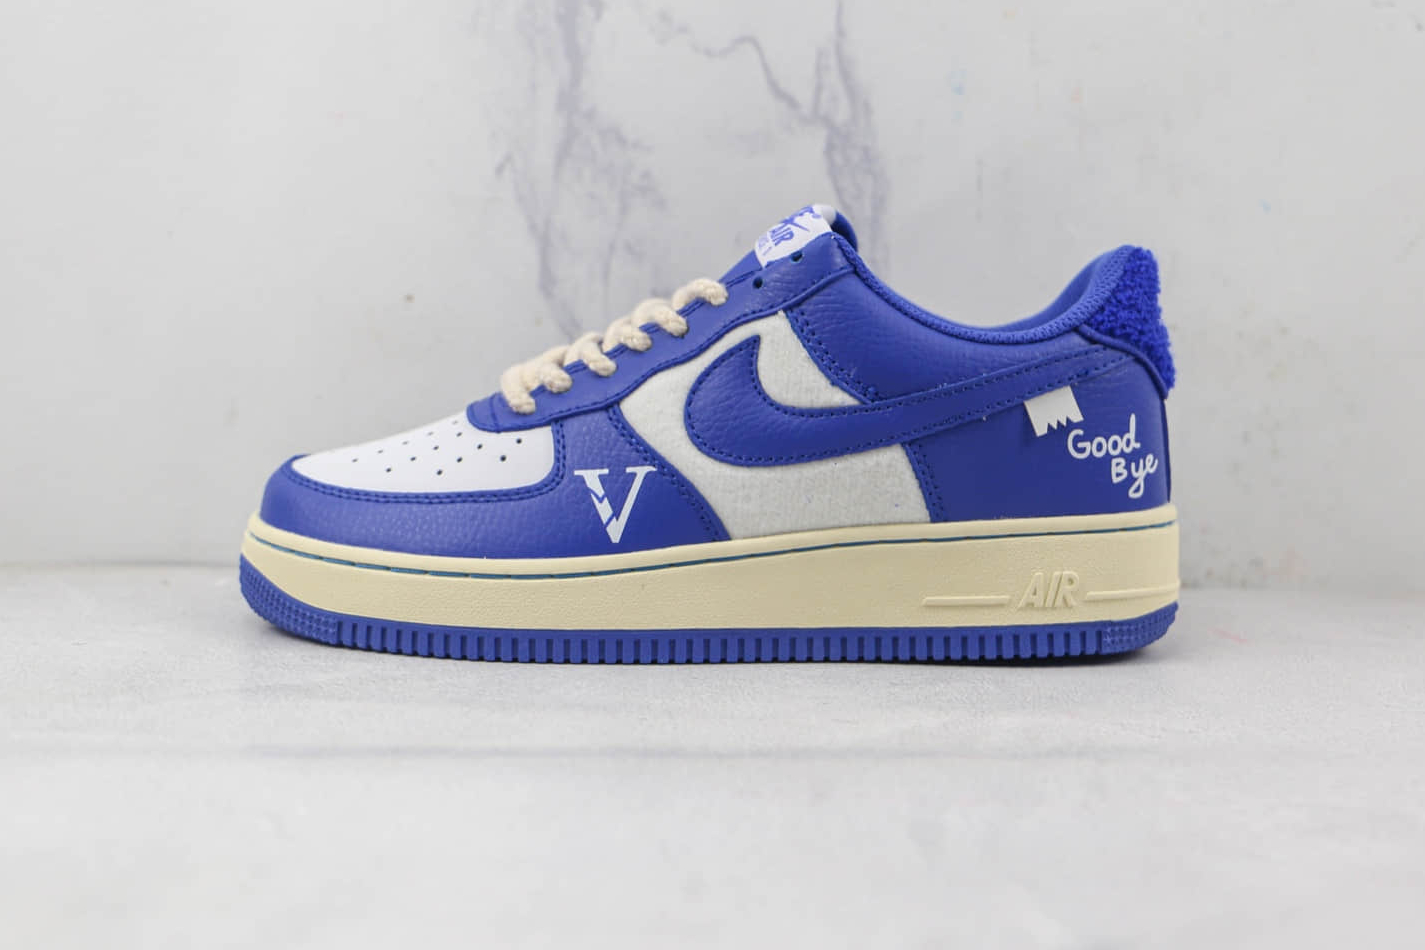 Air Force 1 07 LV8 “Goodbye 82” Blue White - Exquisite Style and Retro Vibes